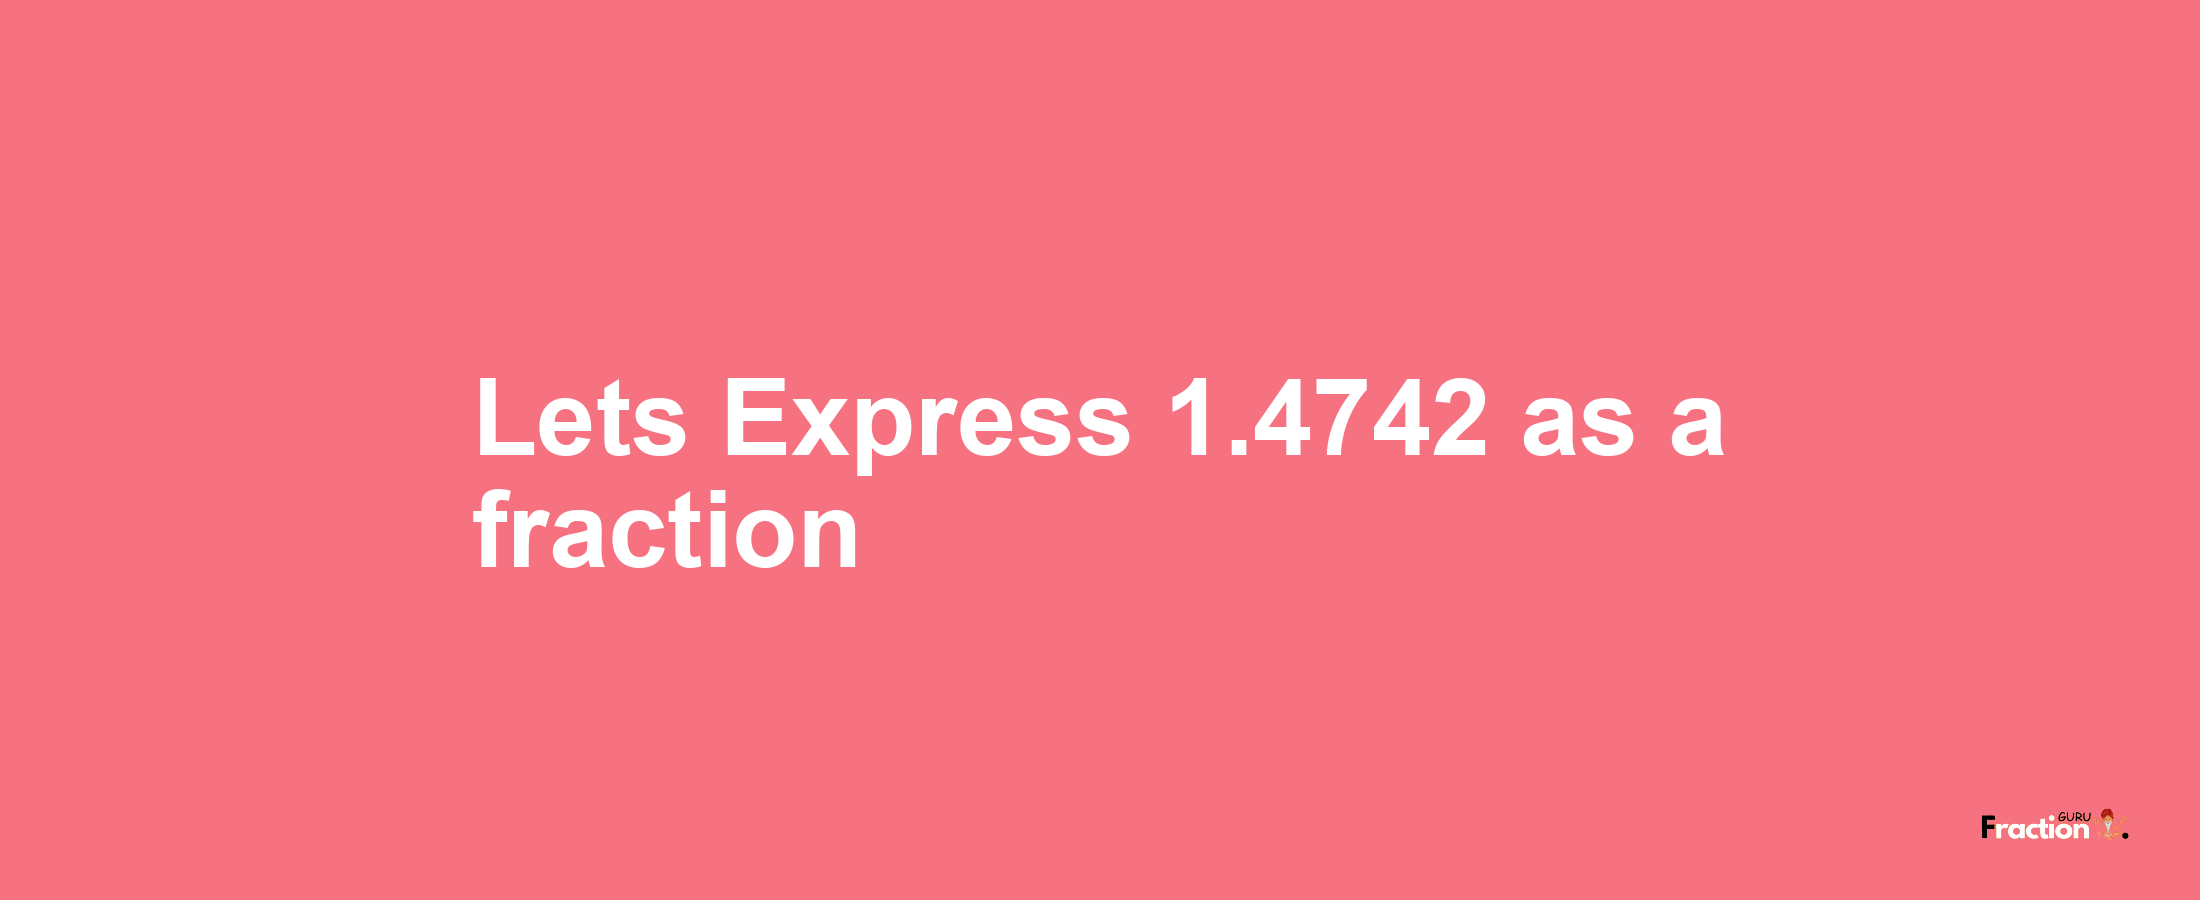 Lets Express 1.4742 as afraction